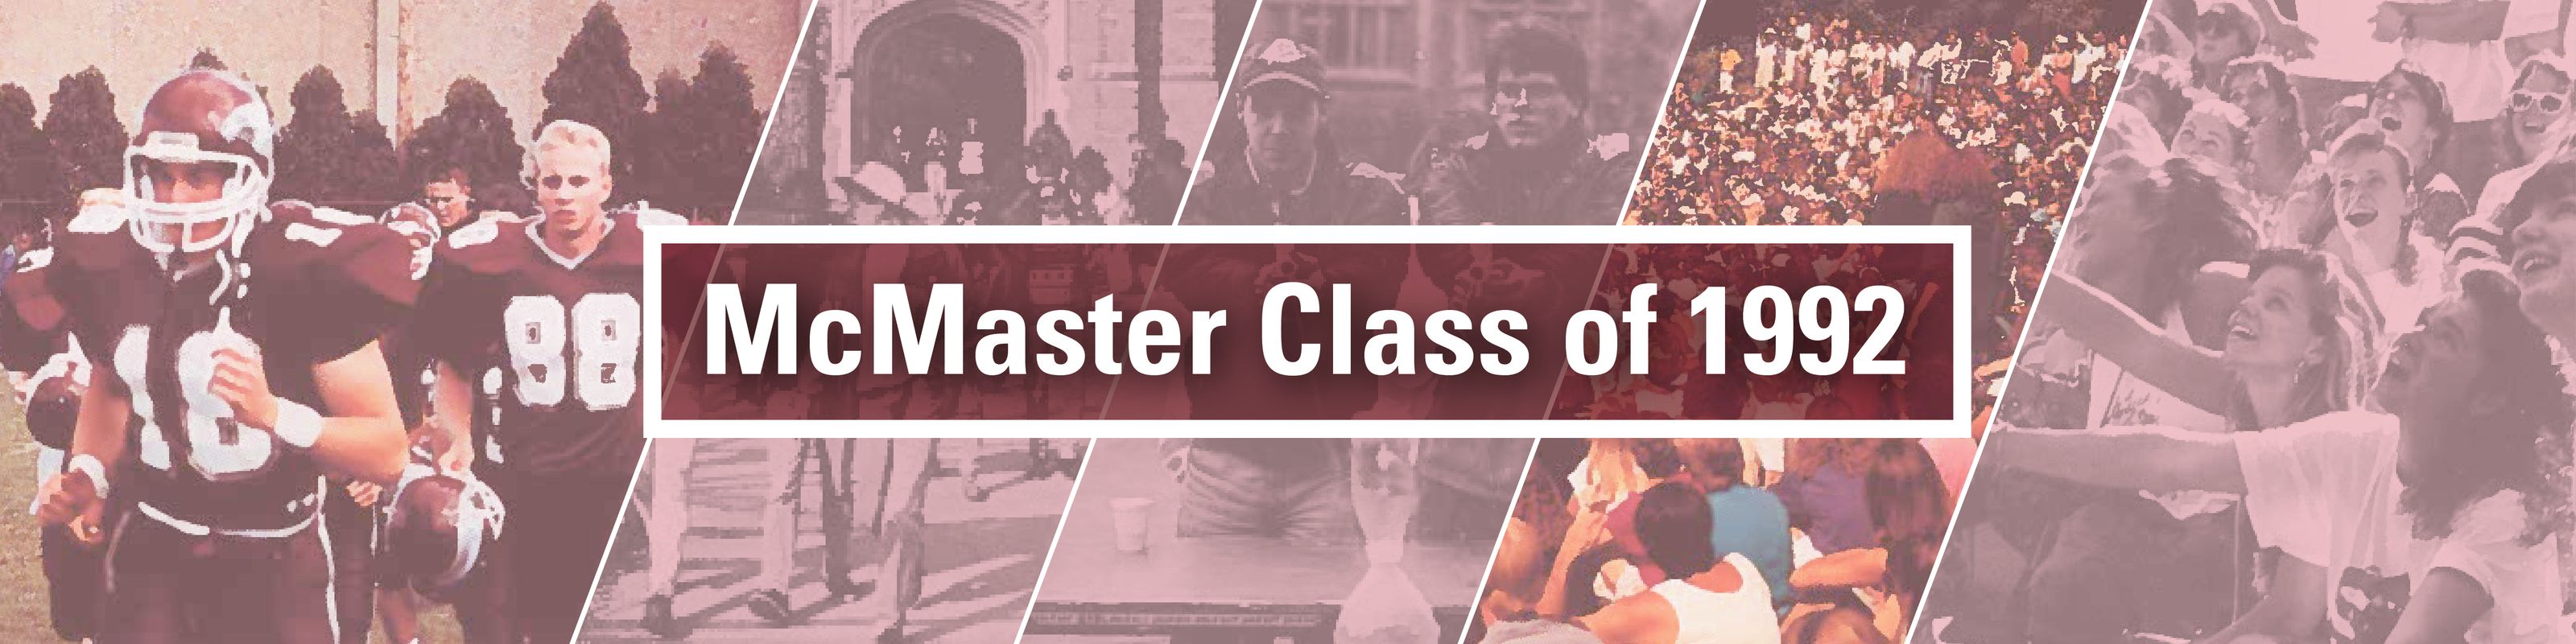 McMaster Class of 1992